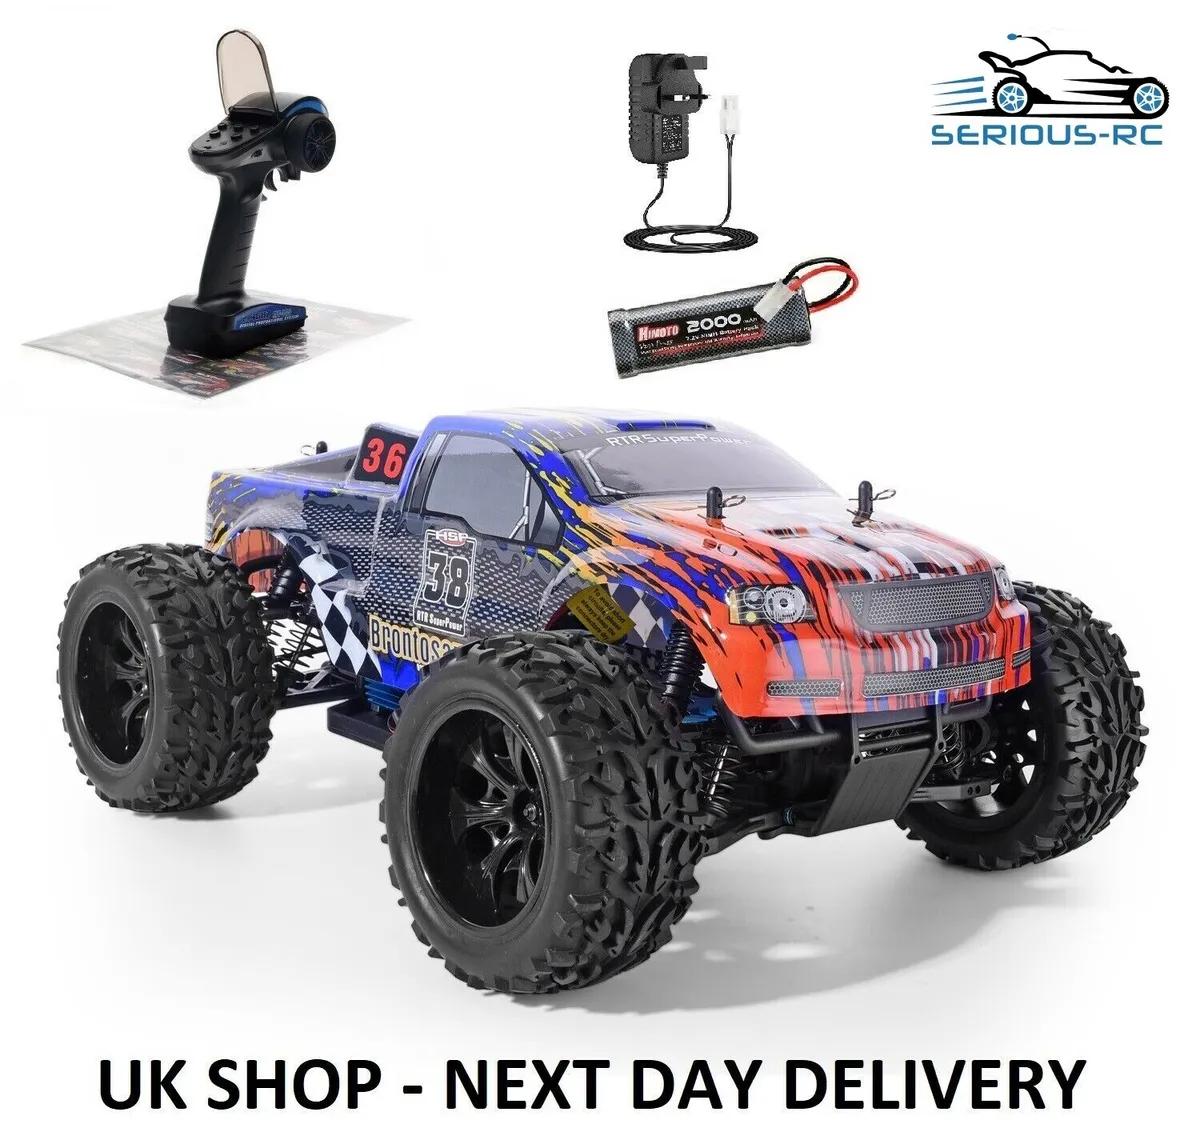 1/10 Electric Rc Truck: Maintenance and Upgrades for Your 1/10 Electric RC Truck